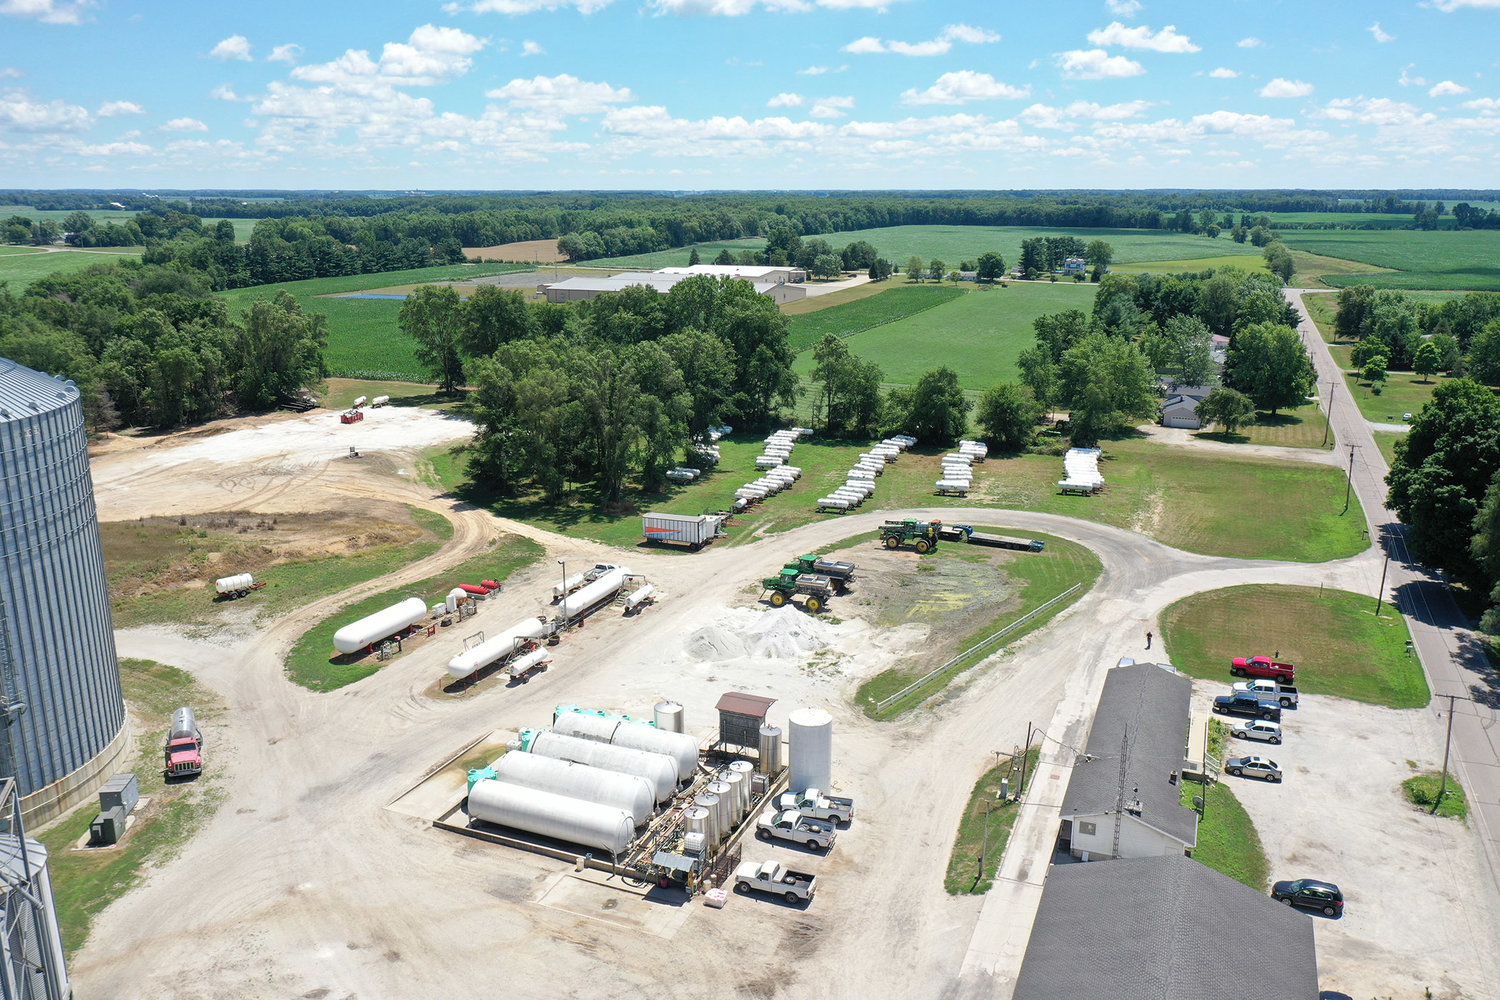 Effective Tuesday, Indiana-based agricultural cooperative Ceres Solutions began serving customers of the former Frick Services agronomy operation. The four facilities which are joining the Ceres Solutions network of retail ag centers are located in Larwill, Leiters Ford (pictured), Wawaka and Wyatt.